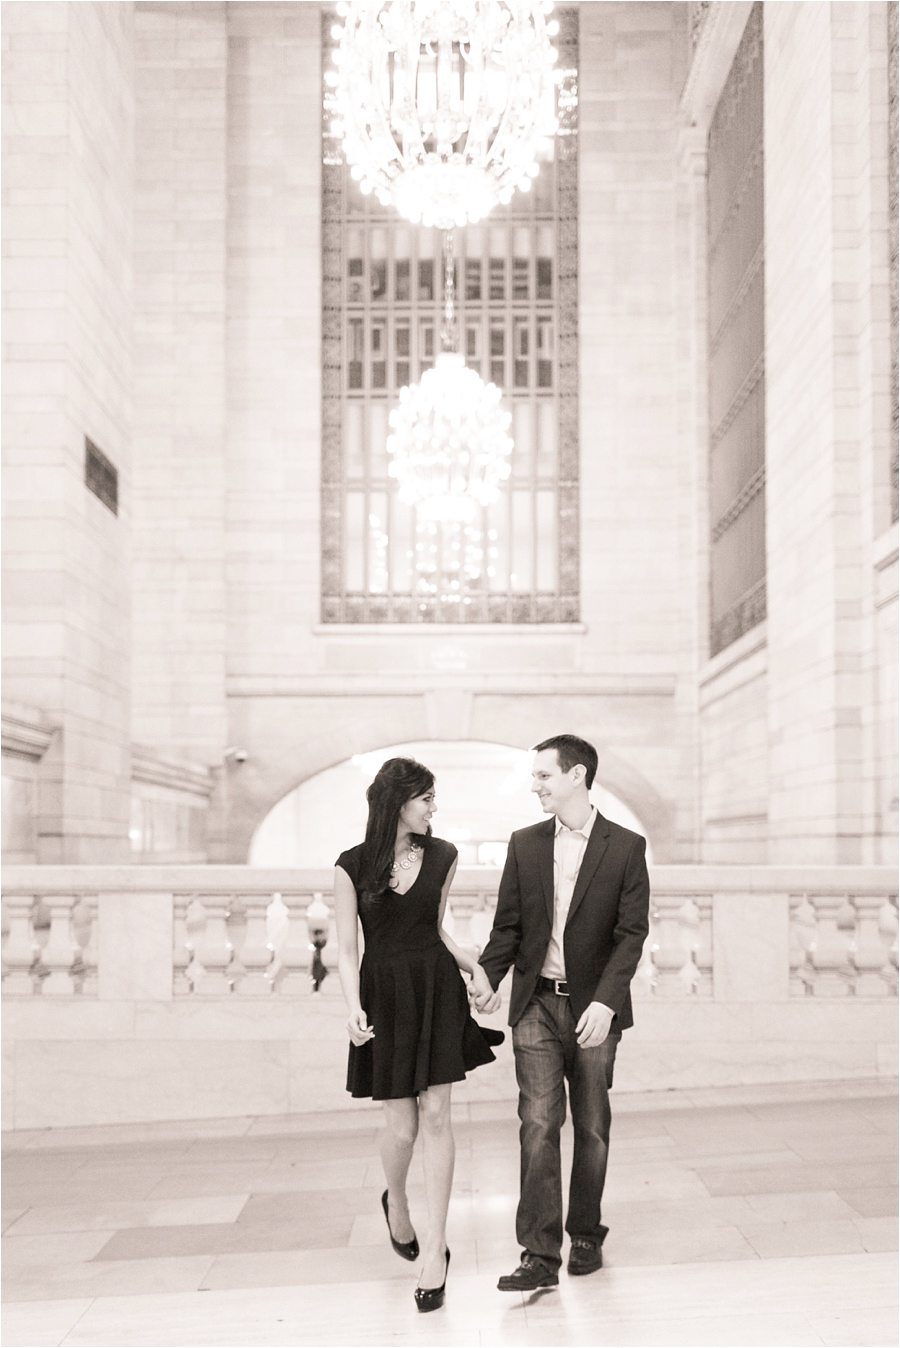 Bryant Park Engagement Photos - Amy Rizzuto Photography-7